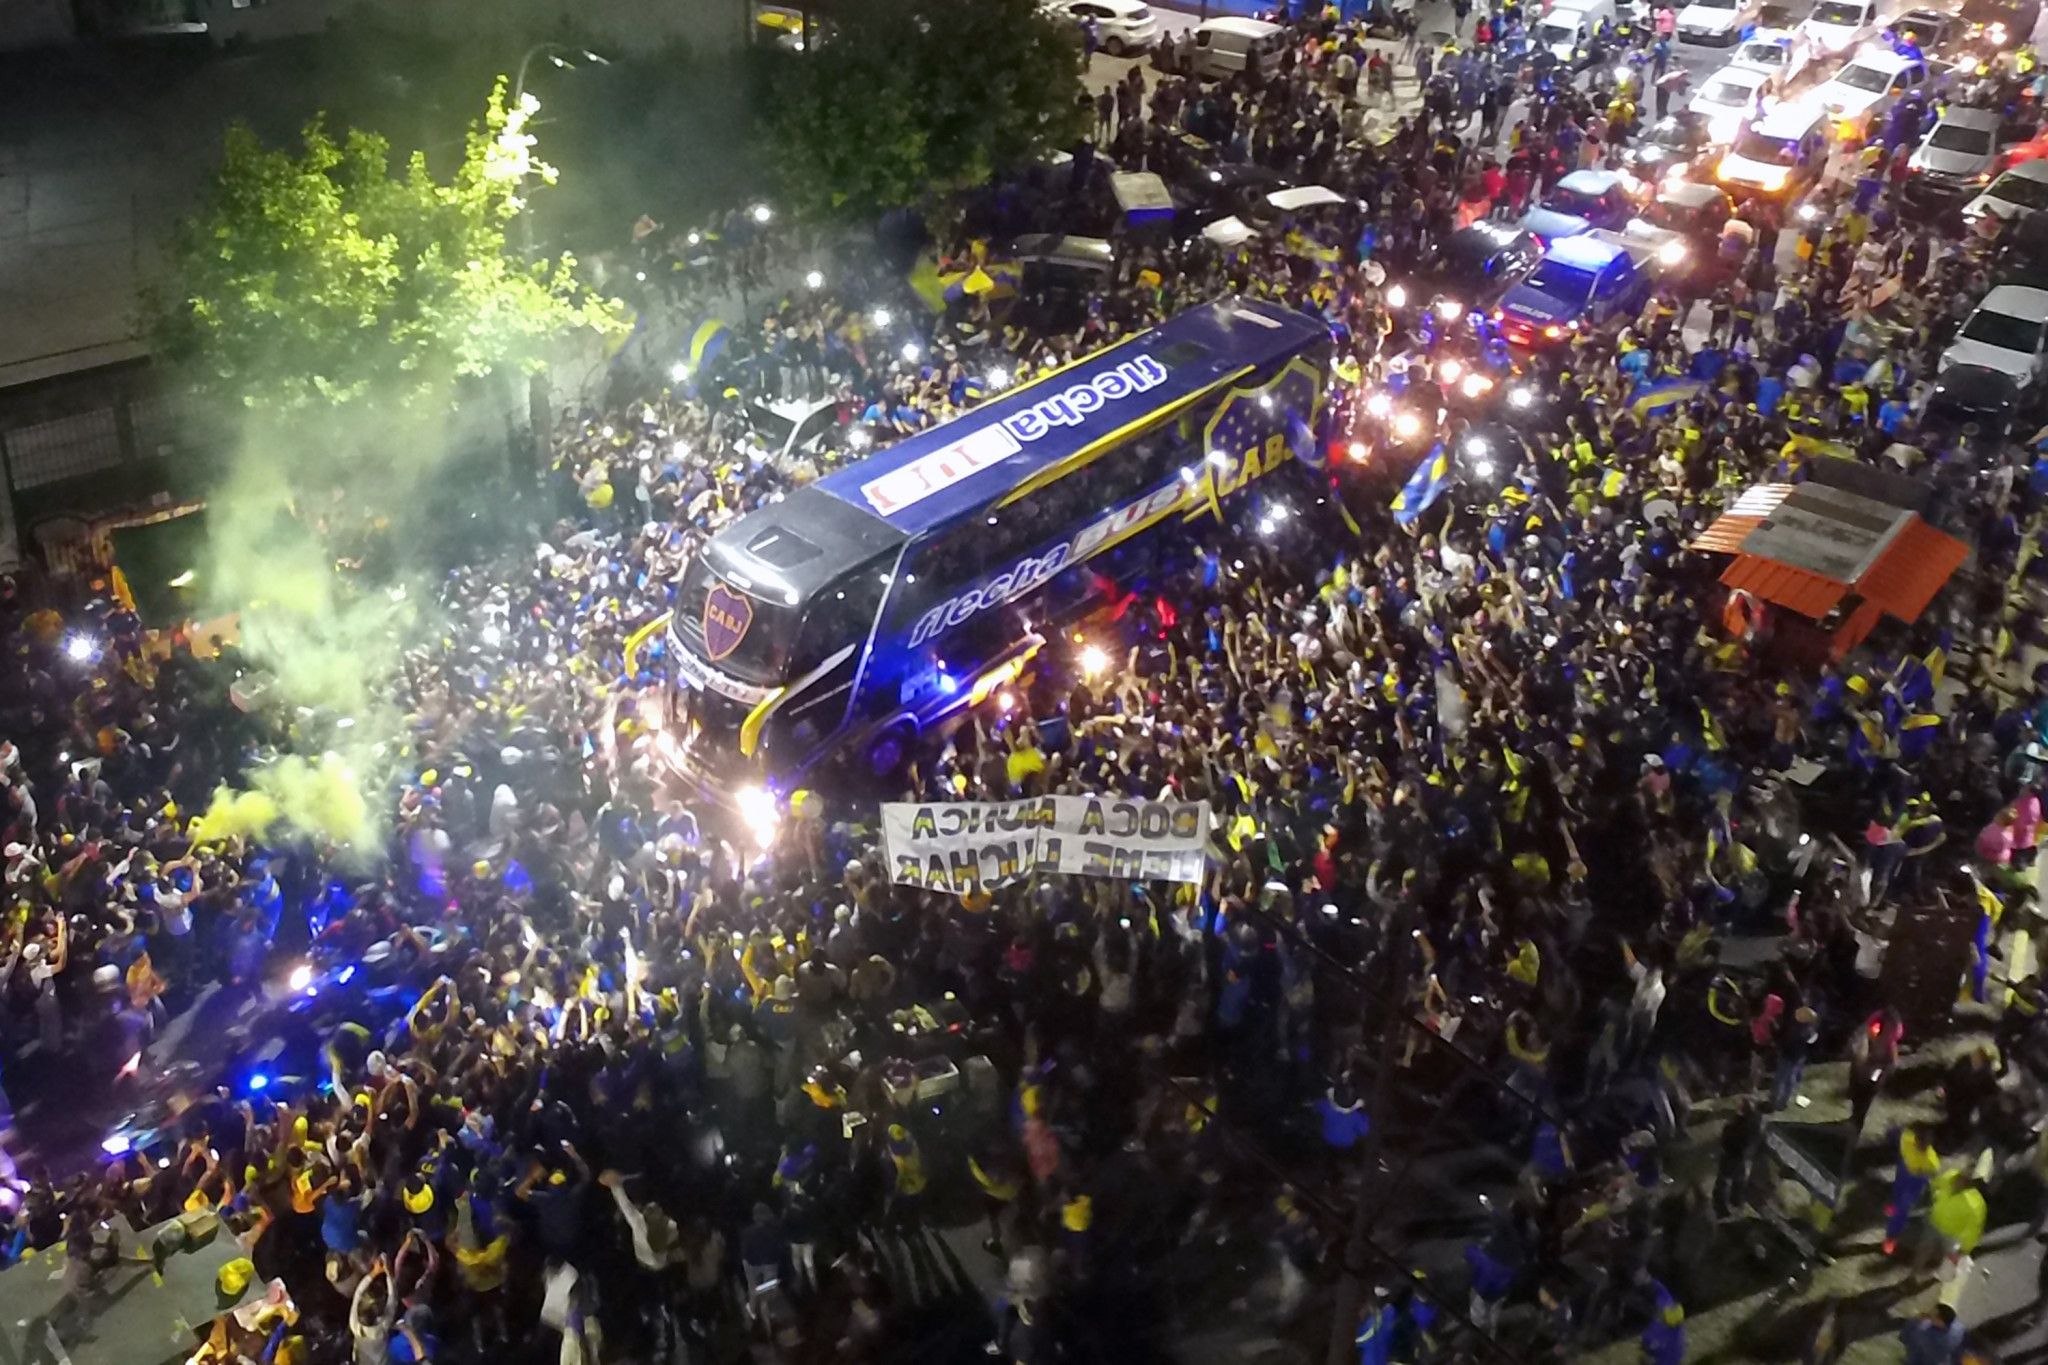 Fans of Boca Juniors gave their team a rousing send-off as they began their journey to Madrid ©Getty Images